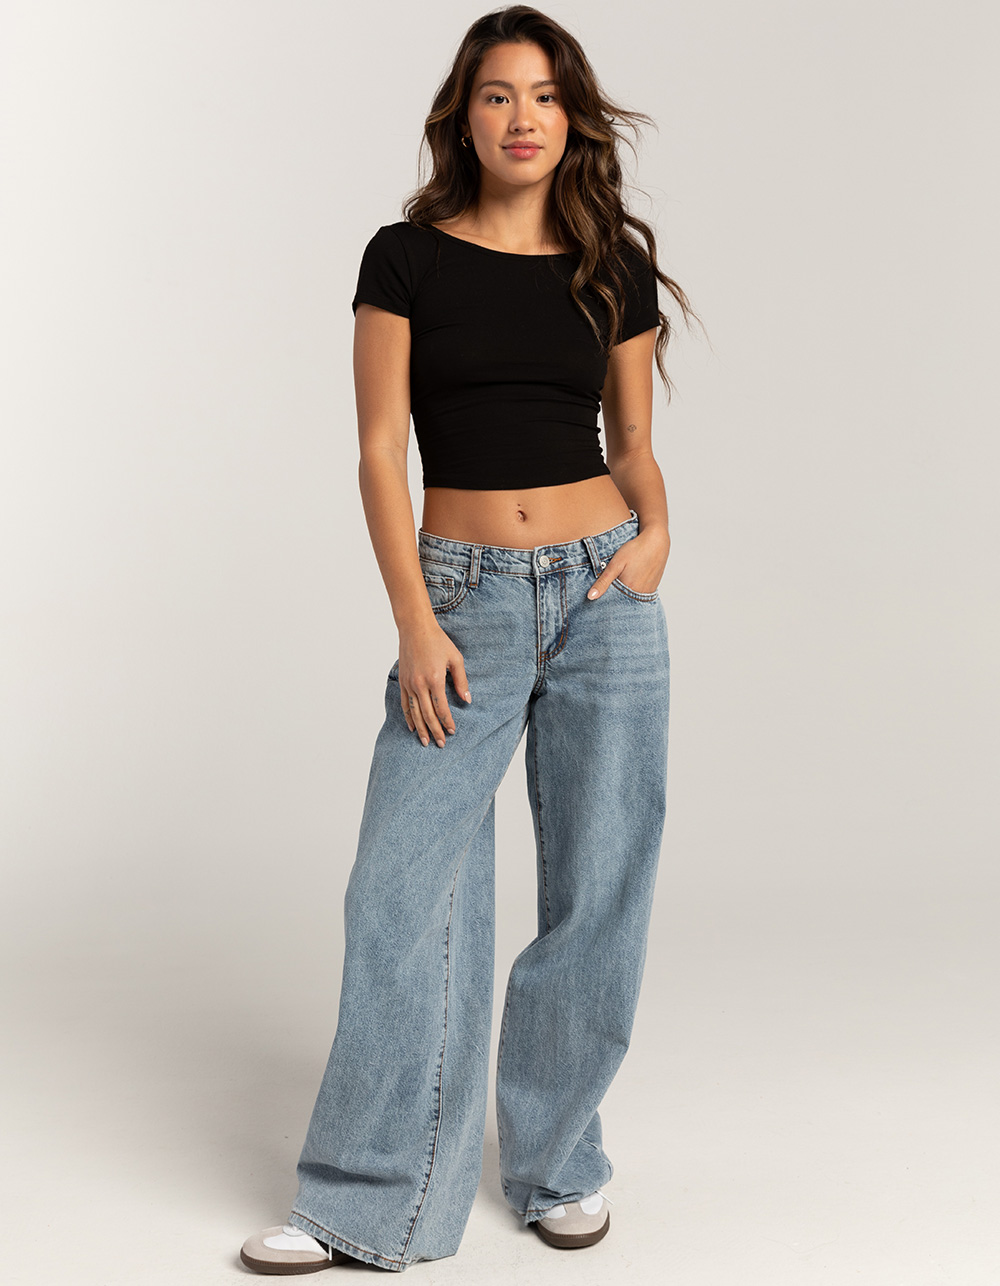 21 Different types of Jeans with Names for Girls😍  Wide leg jeans outfit,  Types of jeans, Teen fashion outfits